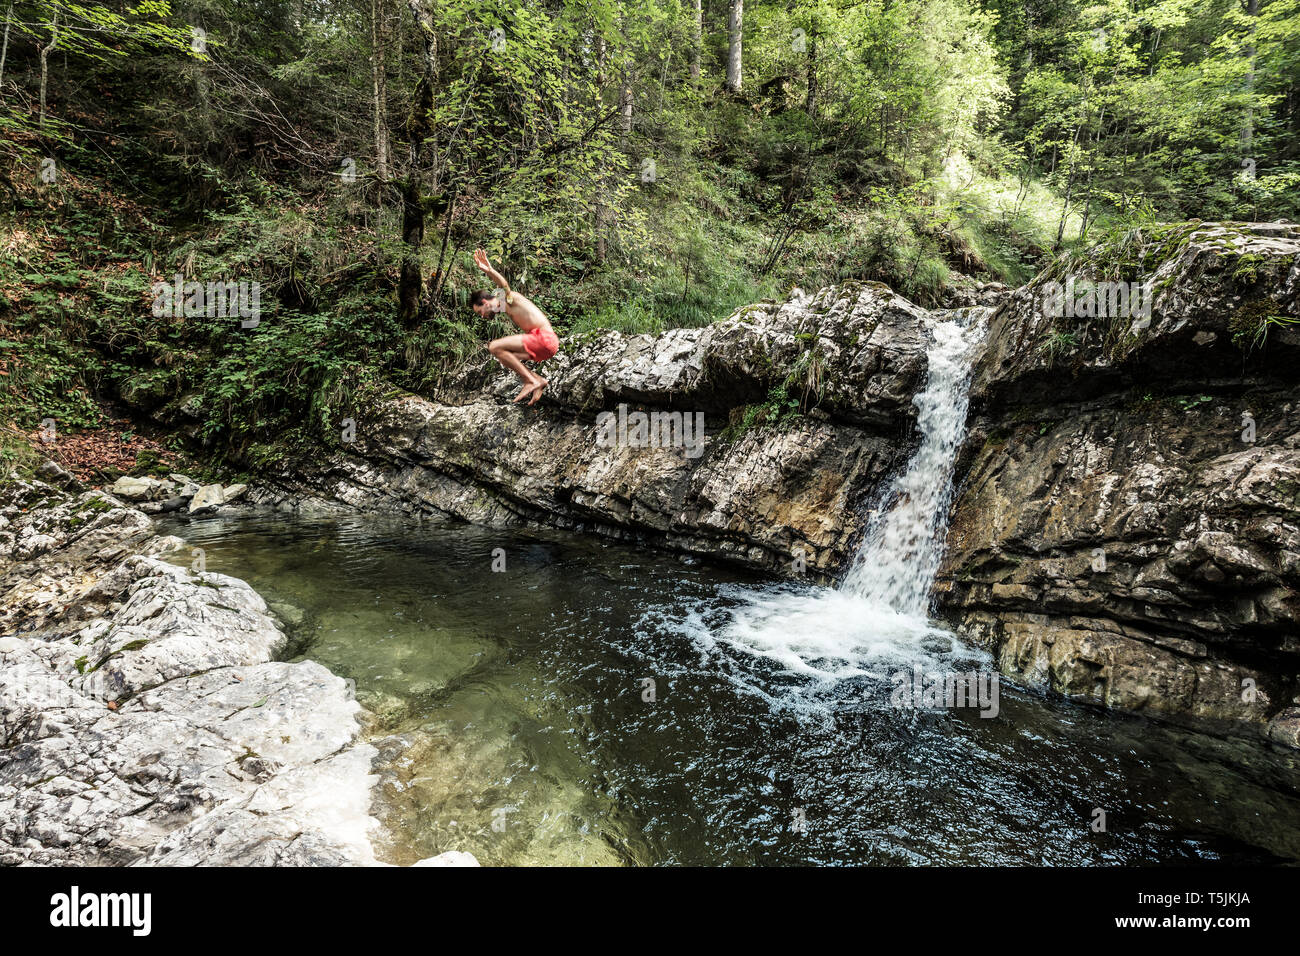 Germany, Upper Bavaria, Bavarian Prealps, lake Walchen, young man is jumping into a plunge pool Stock Photo